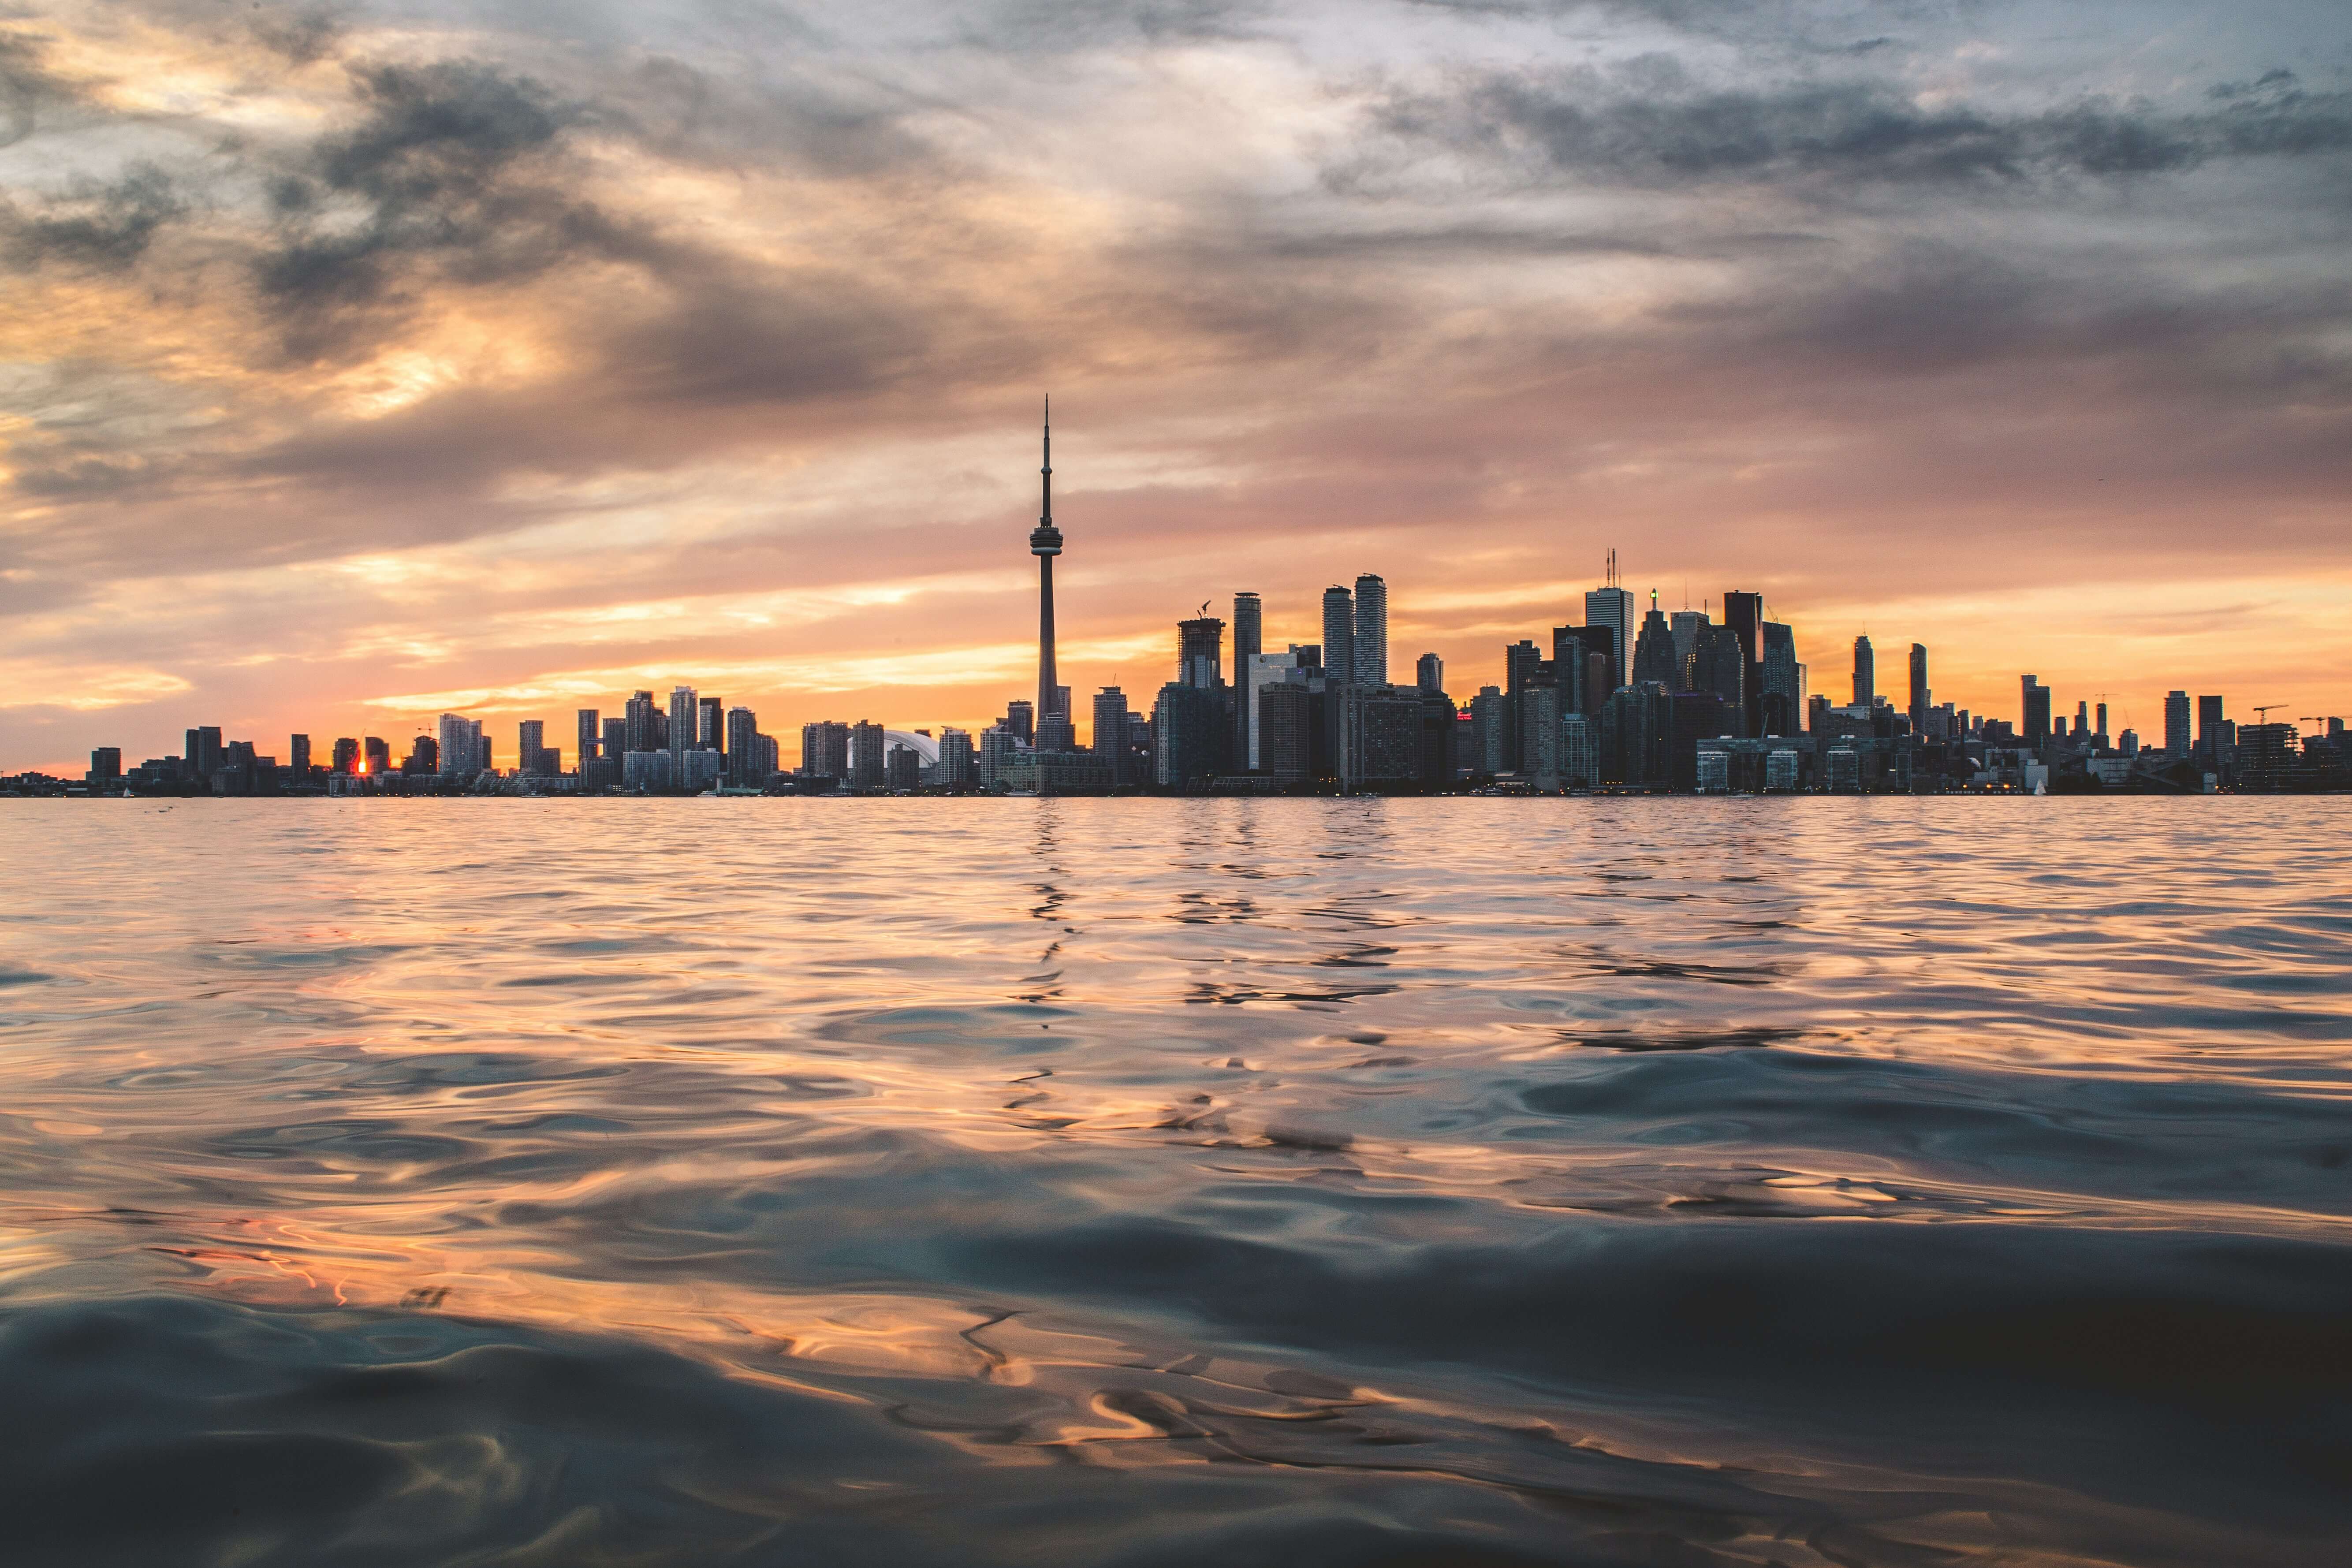 The Toronto skyline seated just above the water.